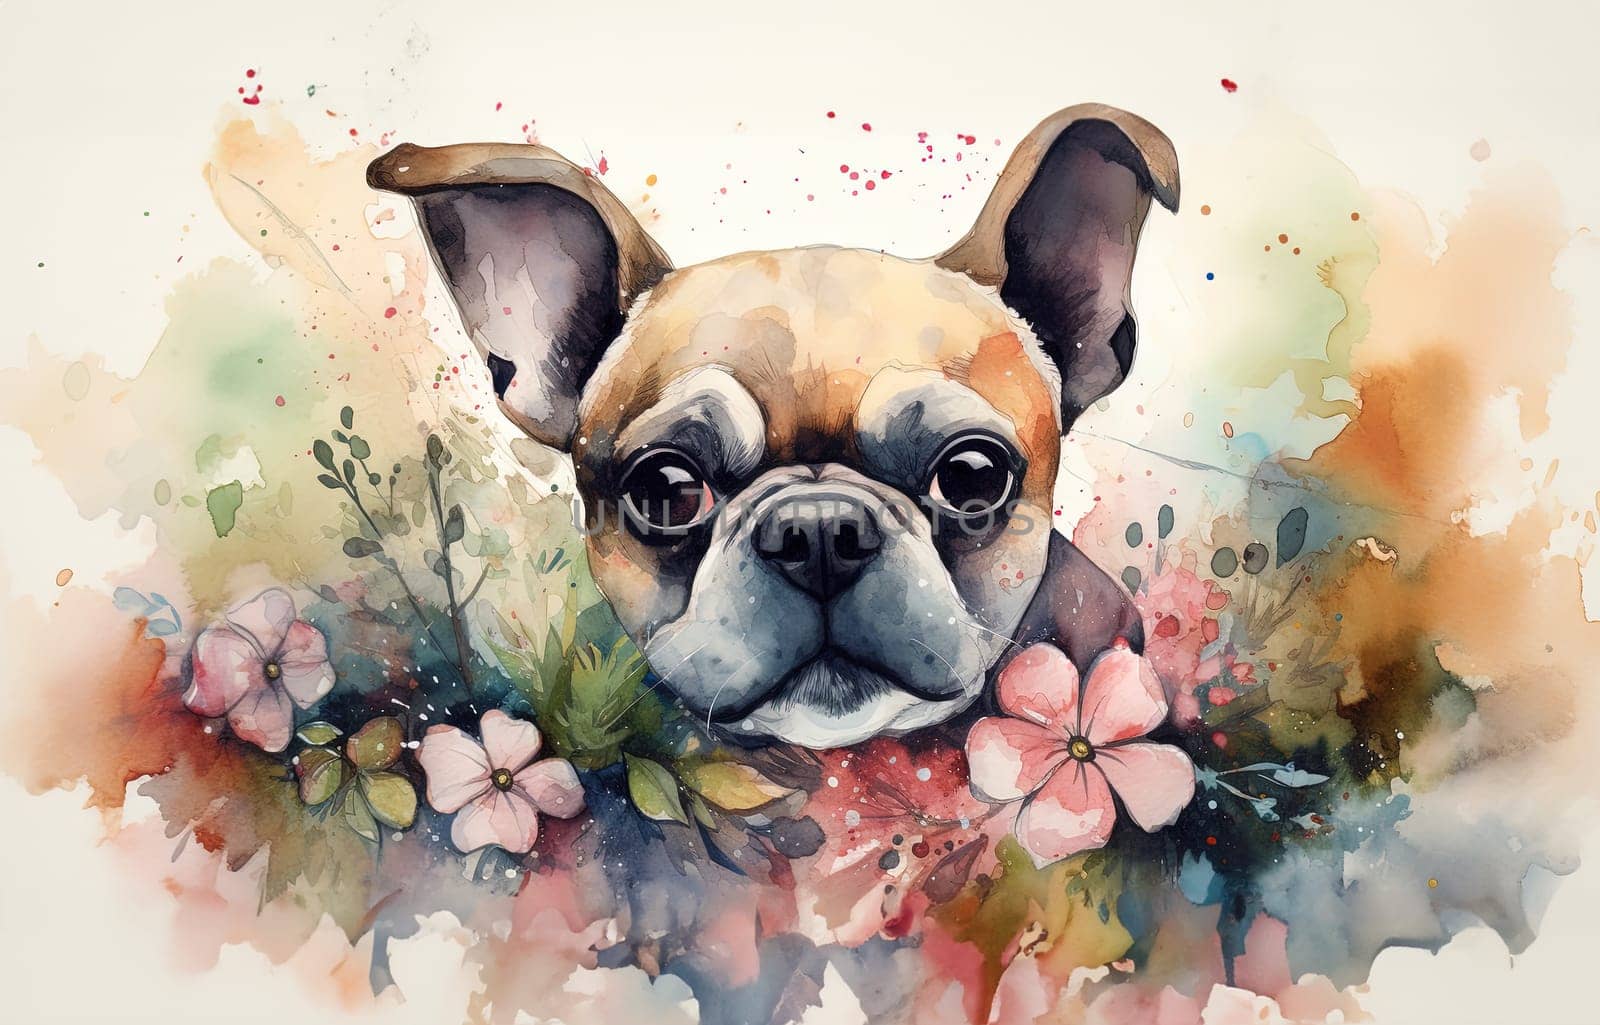 Watercolor illustration of french bulldog surrounded by flowers and splashes of watercolor paint by GekaSkr